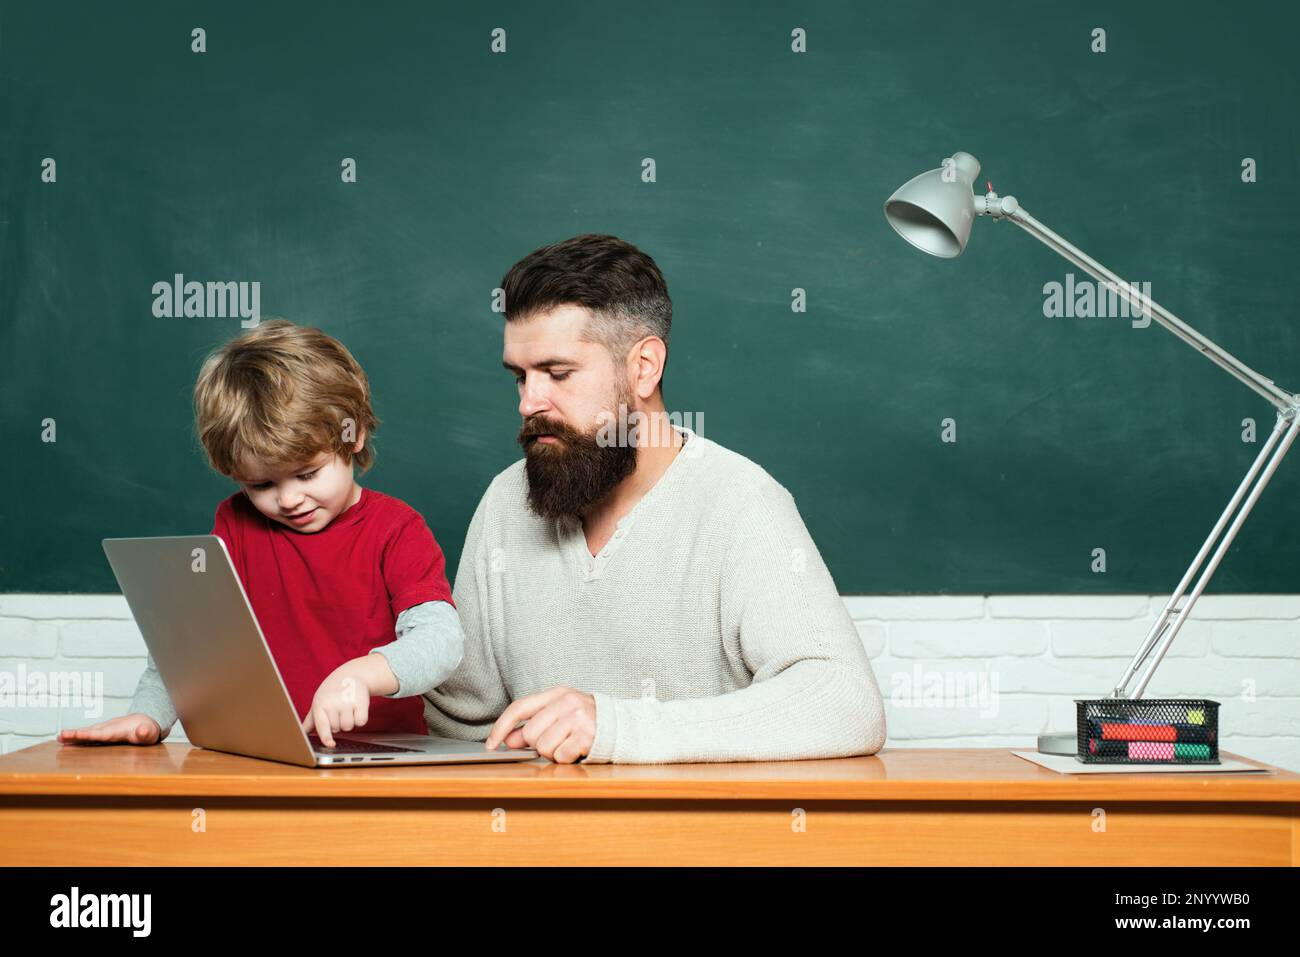 Elementary school teacher and student in classroom. Teacher and schoolboy using laptop in class. Chalkboard copy space. Father and son. Elementary Stock Photo